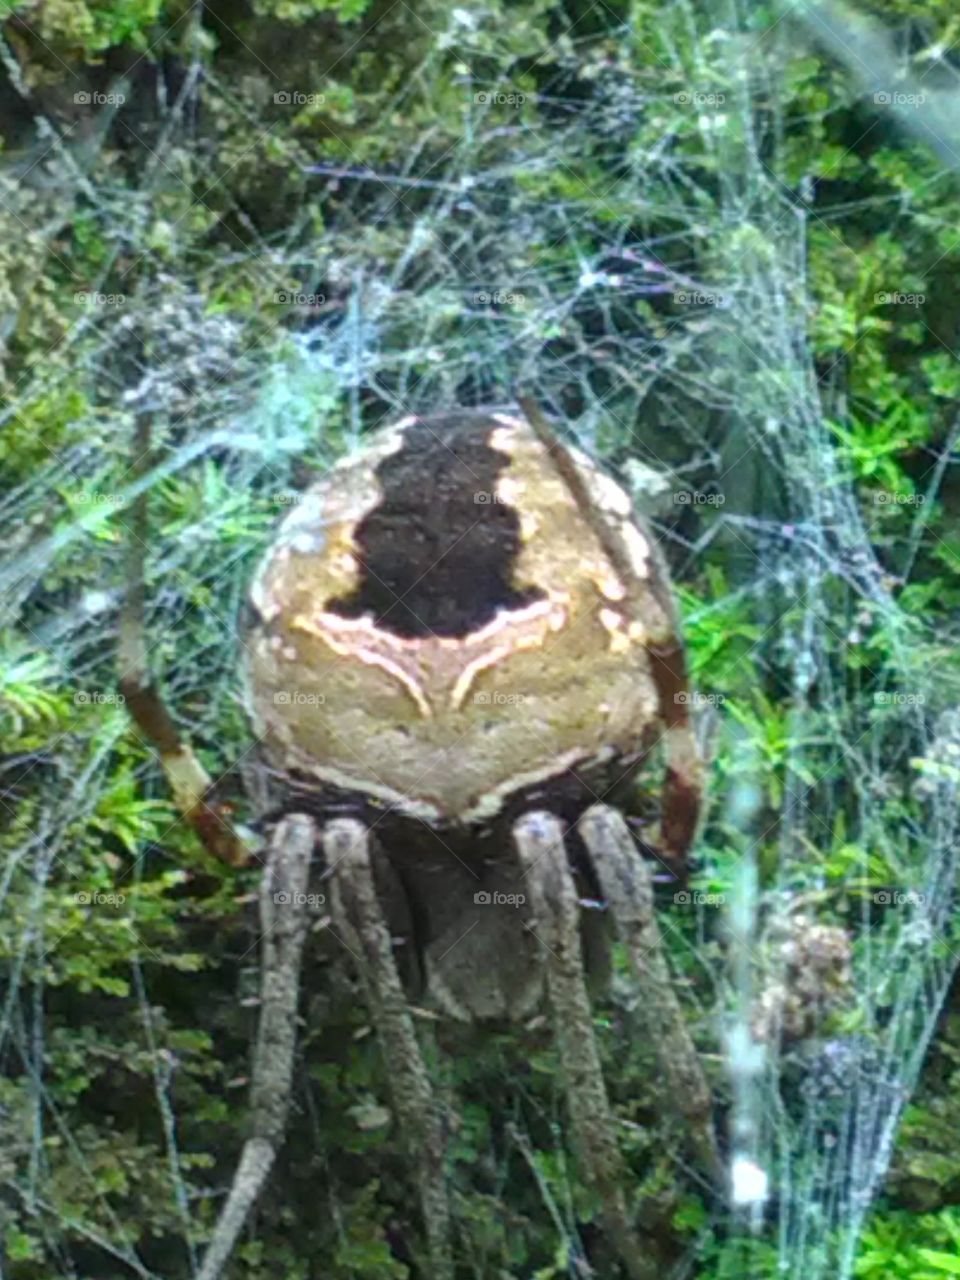 This spider creates a trap for itself and lives in it, and if a worm fades in it then it becomes its food.